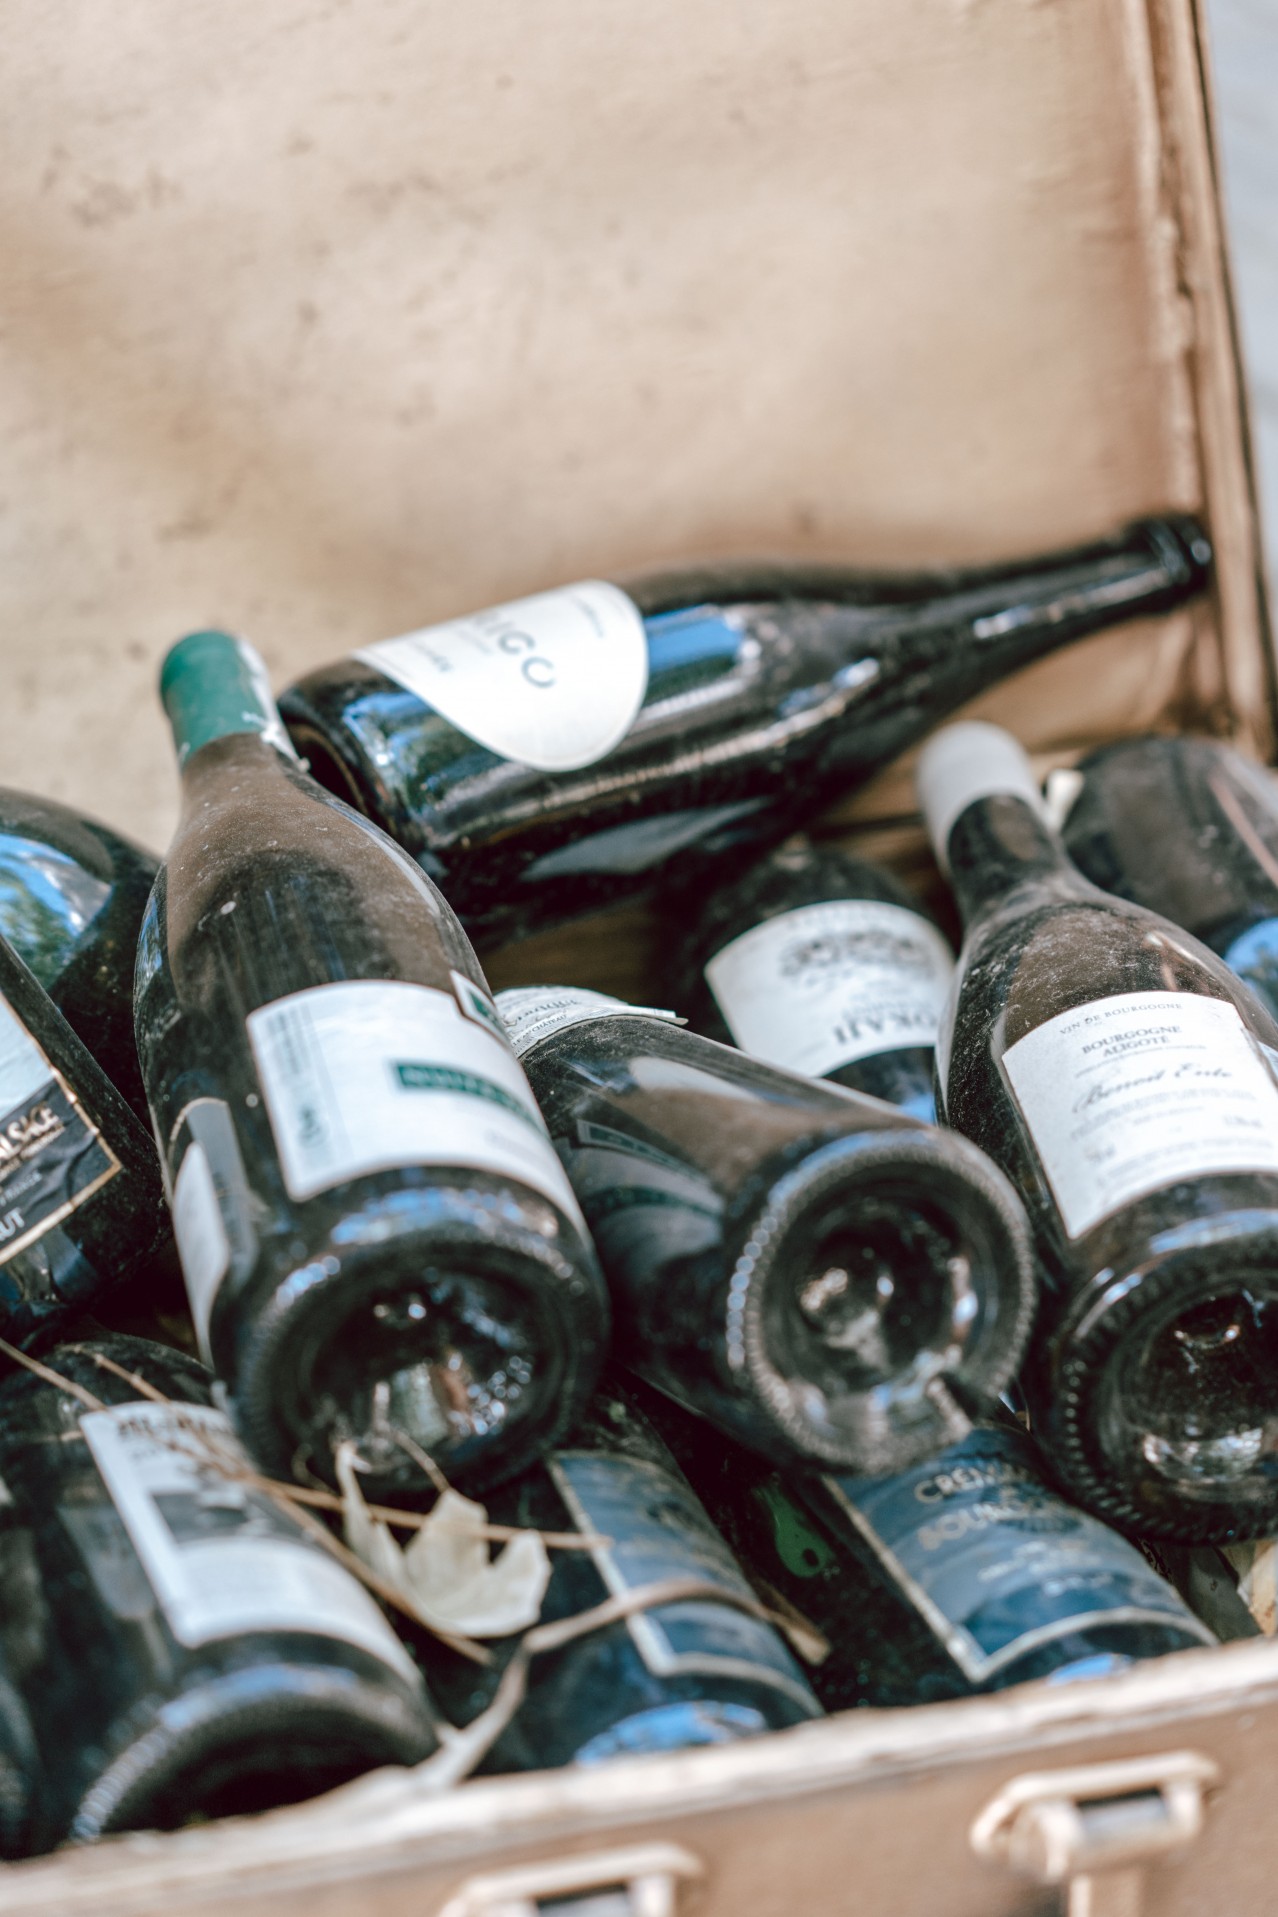 Old wine bottles in the suitcase